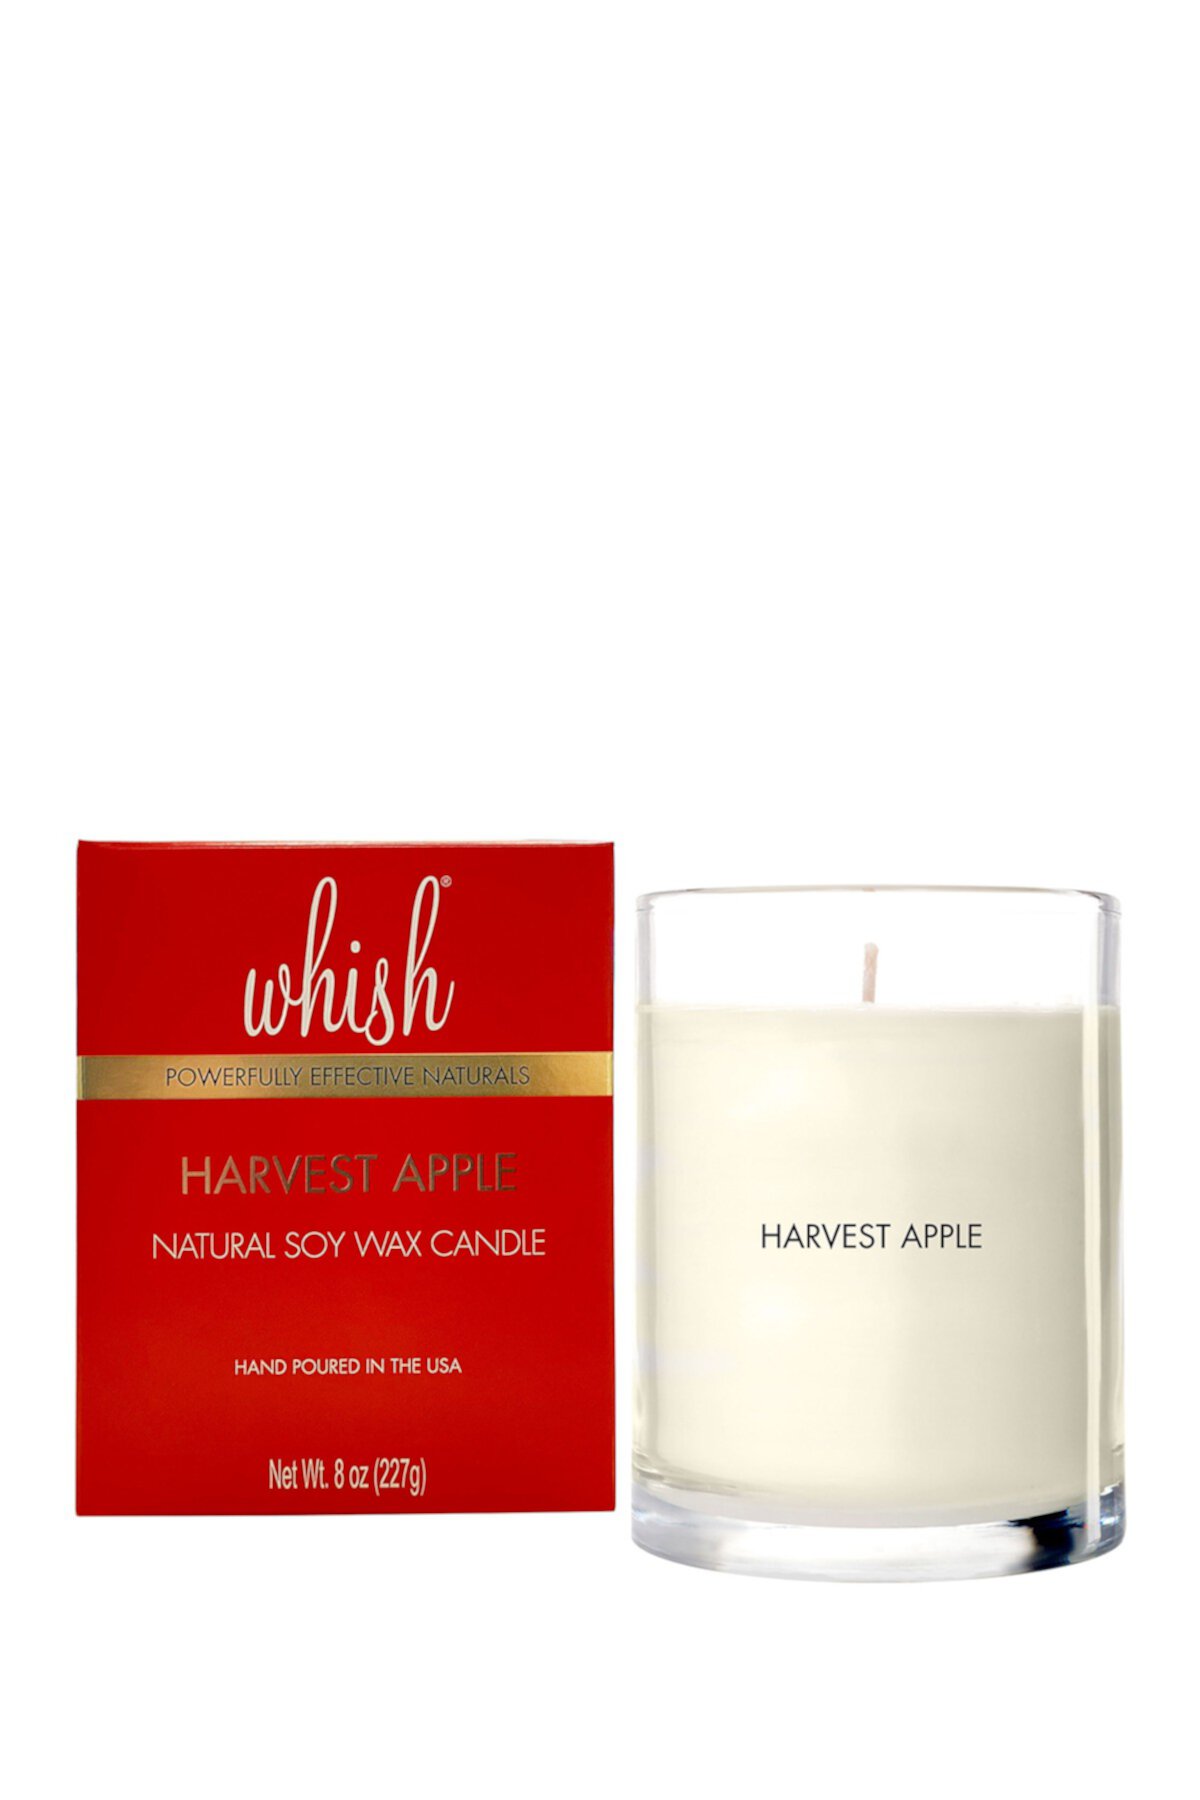 Natural Soy Wax Candle, Harvest Apple, 8oz Whish